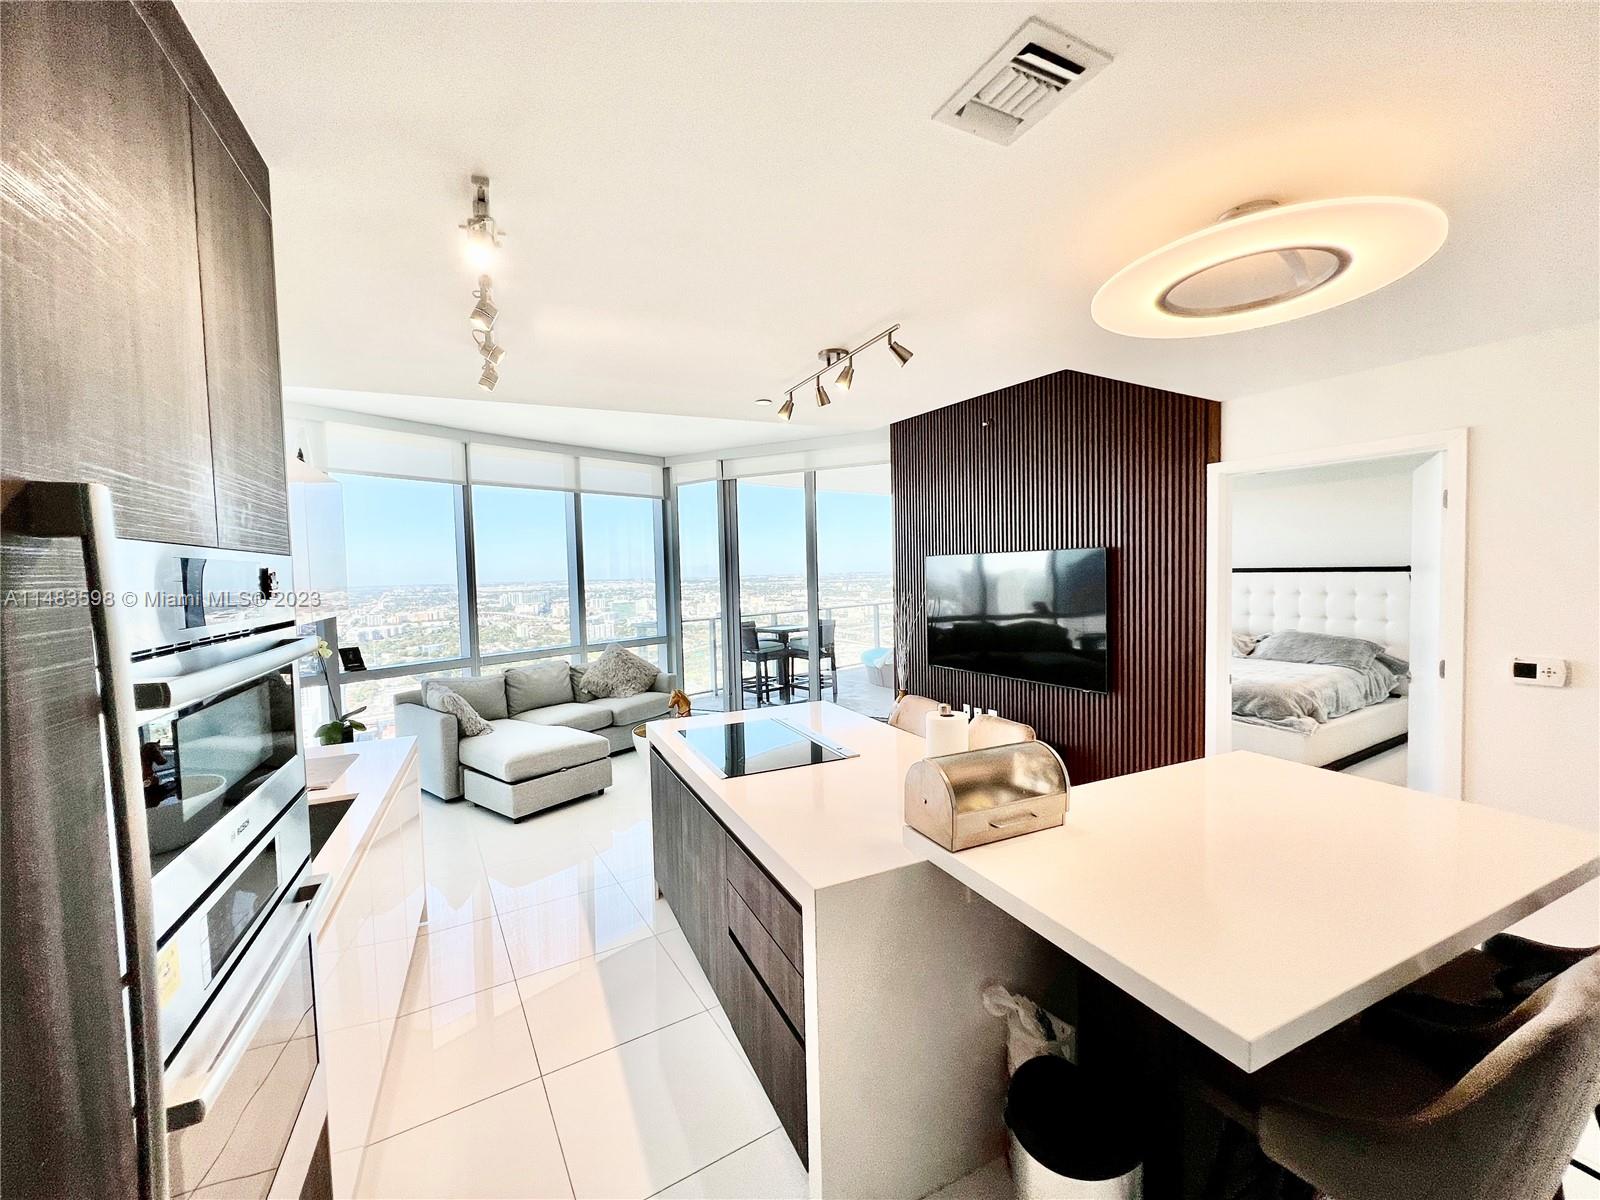 Highest Available 45th floor 1 Bedroom + Den, & 2 full bathrooms. Best line with breathtaking views. This unit offers 10-ft ceilings, floor-to-ceiling impact windows w/remote shades, custom lighting, custom closets, eat-in kitchen with Sub-Zero/Bosh appliances, master bath with duel-sink vanity, soaking tub & glass-enclosed shower, laundry room a specious terrace with bay views. Best line in the building with unobstructed west views with the most amenities- Paramount Miami World Center. Experience luxury urban living with breathtaking views with amenities: 24-hour valet service, spa, yoga studio, fitness center, observatory, Sky Deck, 7th-floor pool-3 pools & cabanas, rooftop pool, boxing ring , golf simulator, theater, jam room & much more. Live in the heart of Miami.